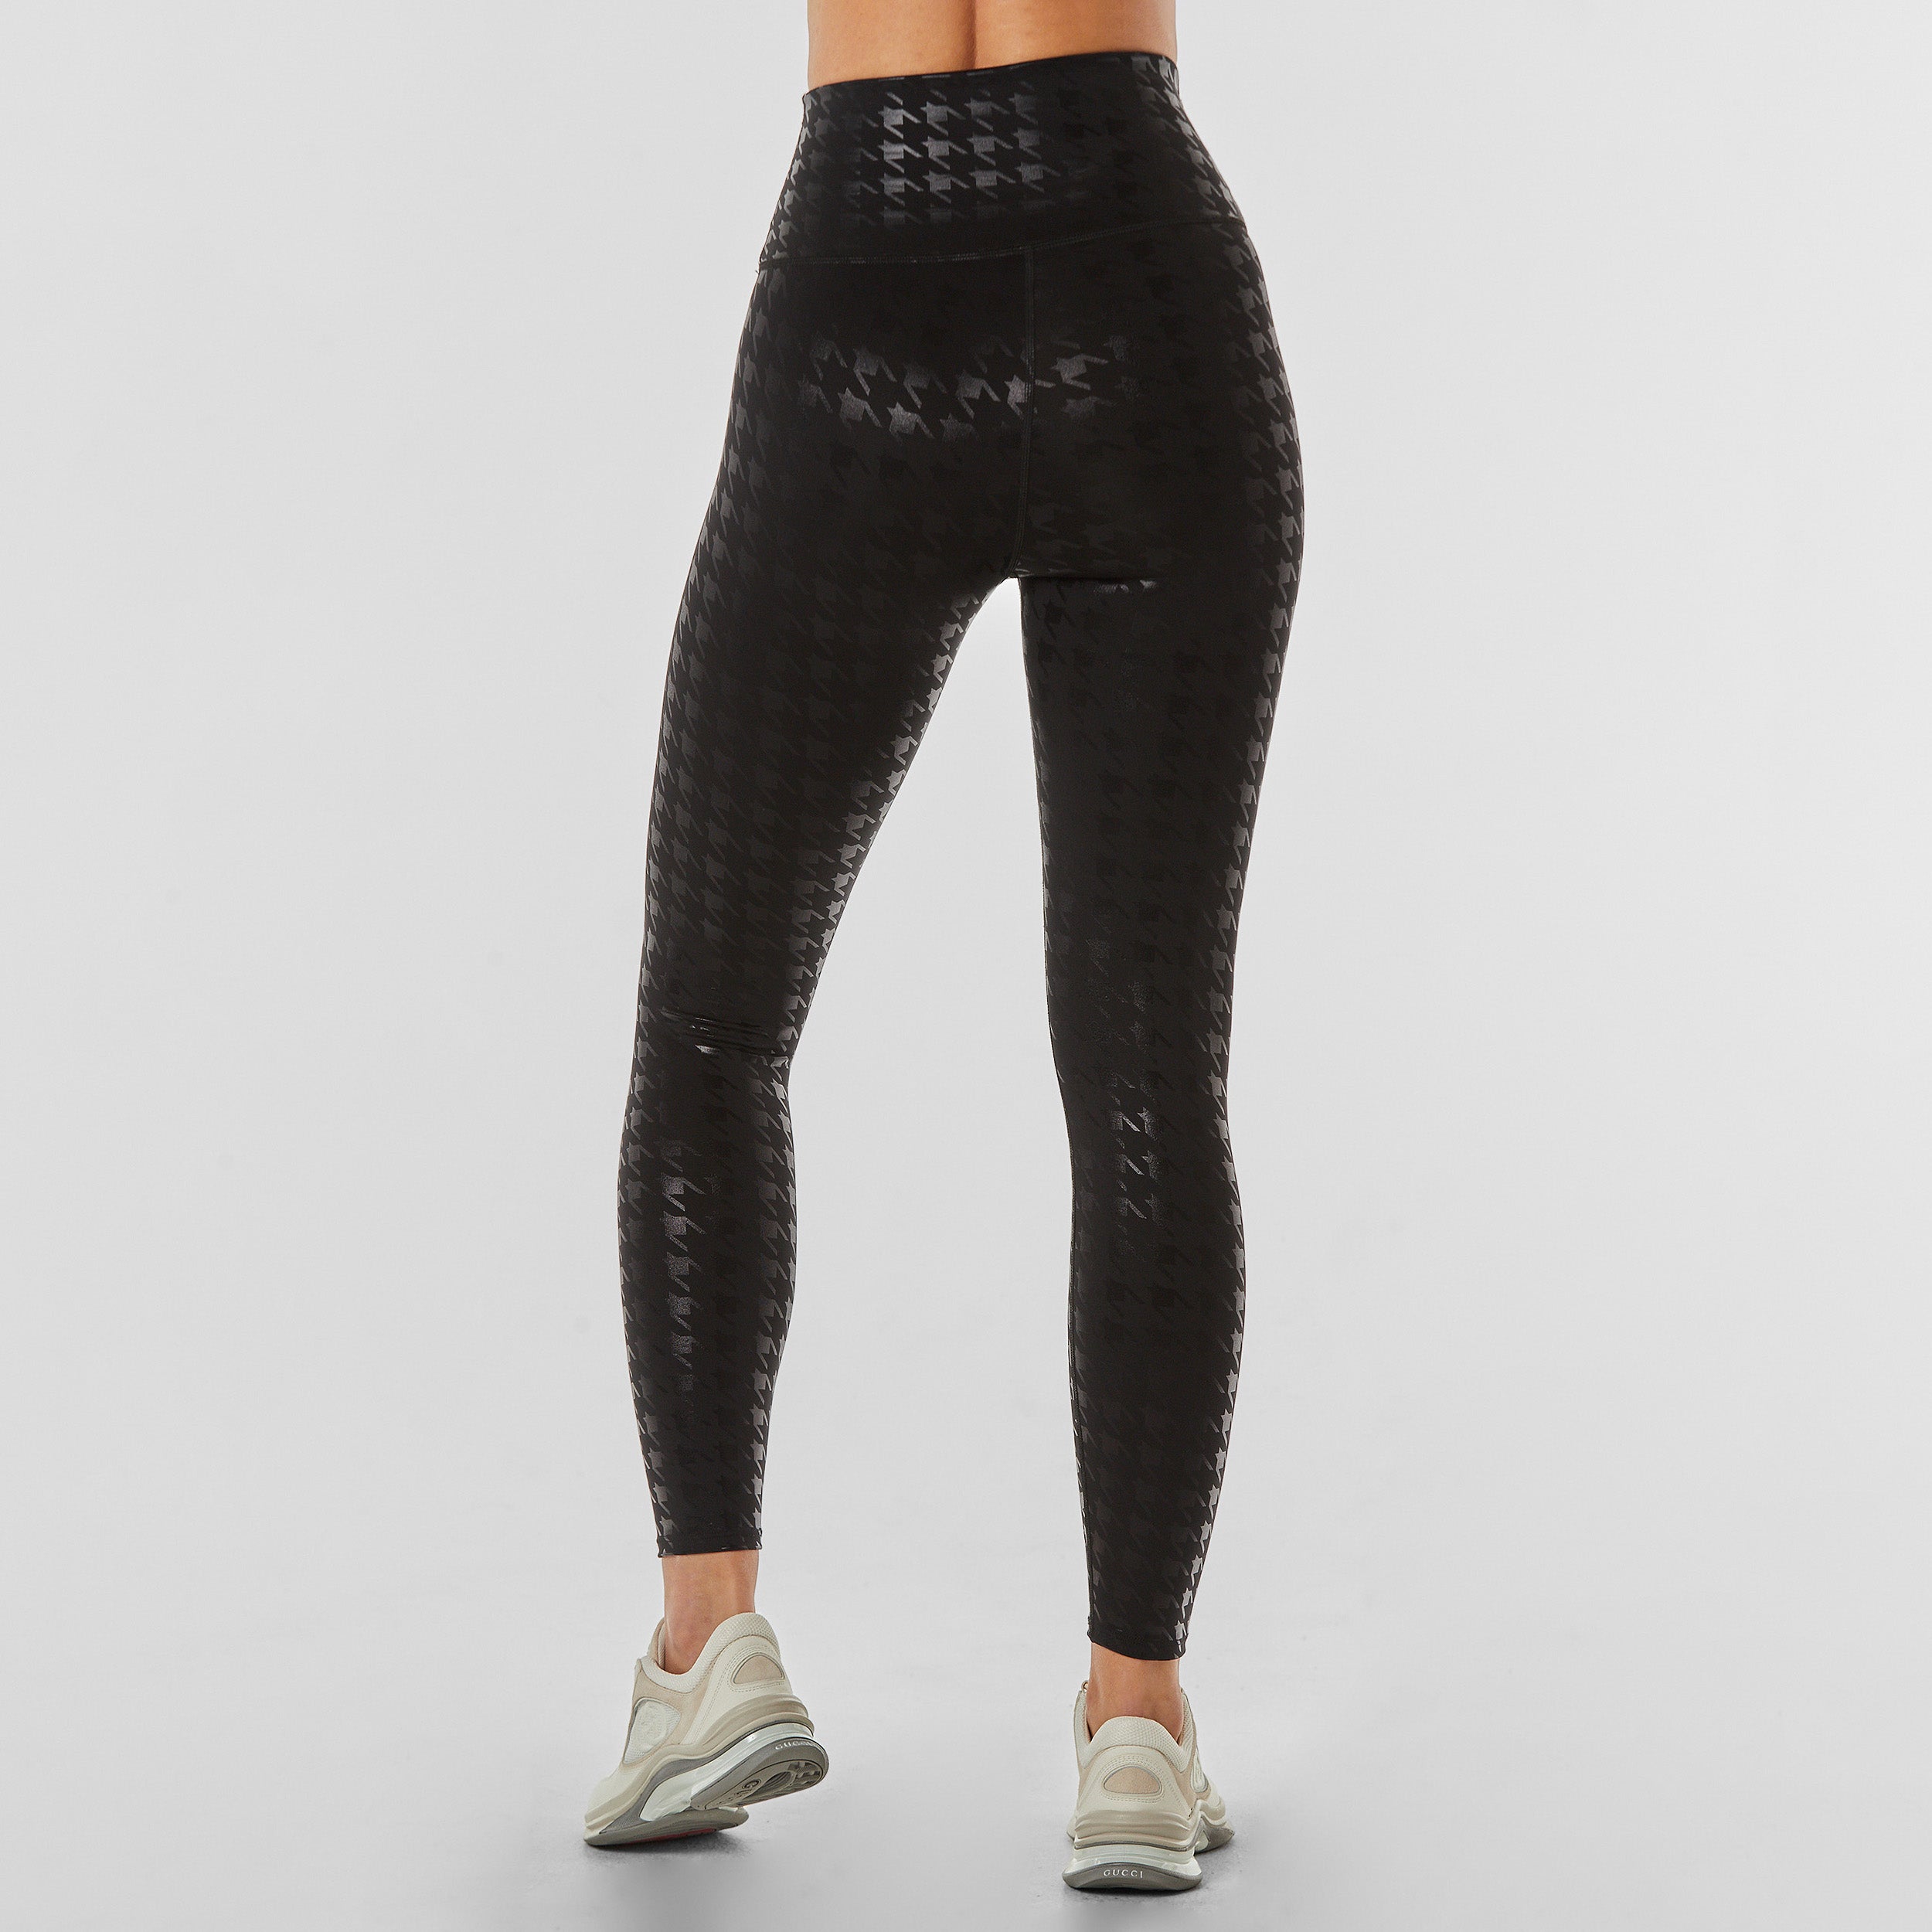 Rear view of woman wearing black on black glossy houndstooth patterned legging